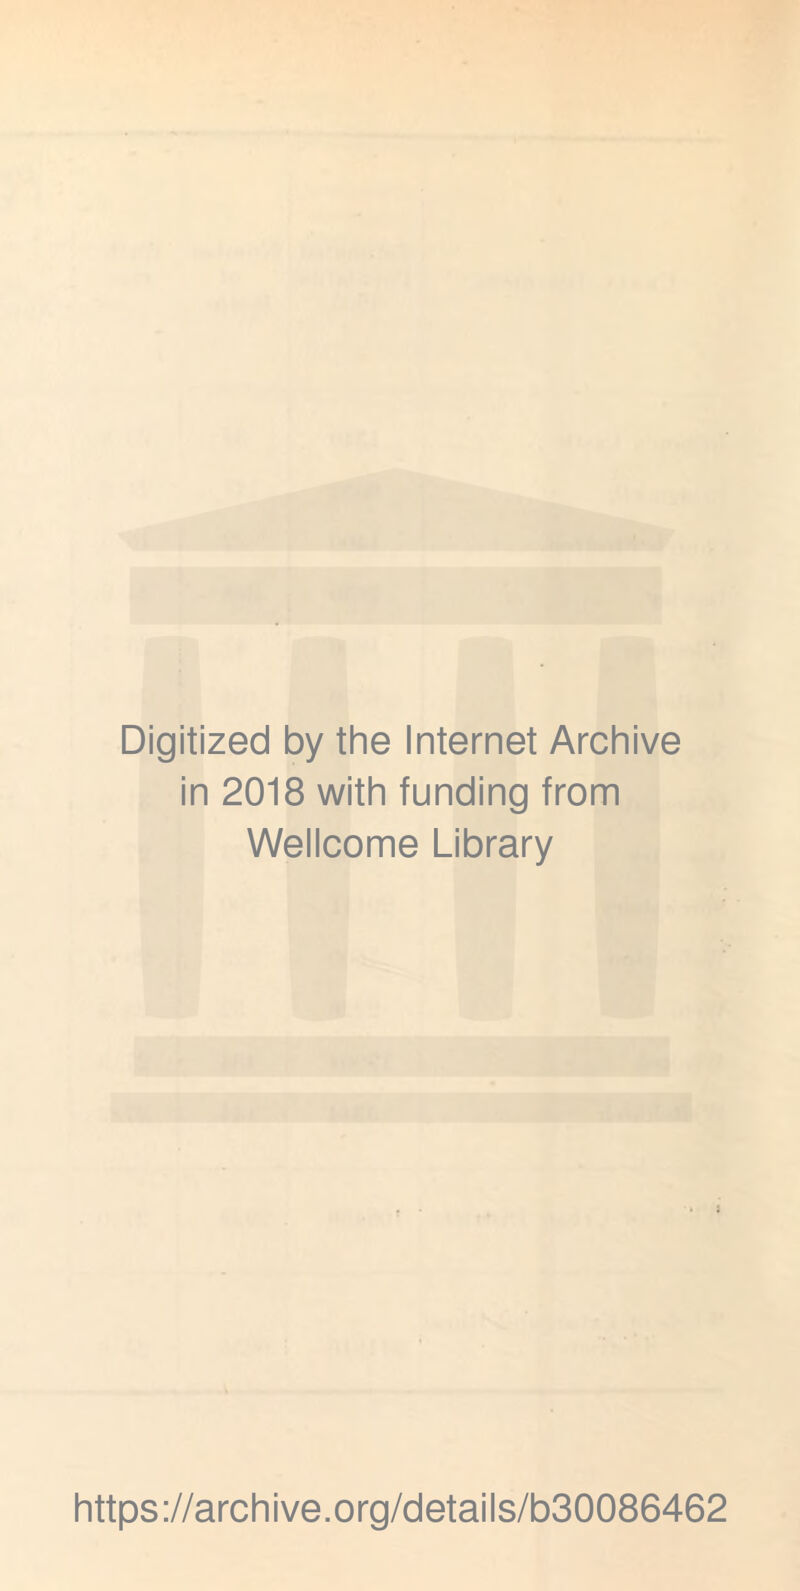 Digitized by the Internet Archive in 2018 with funding from Wellcome Library https://archive.org/details/b30086462